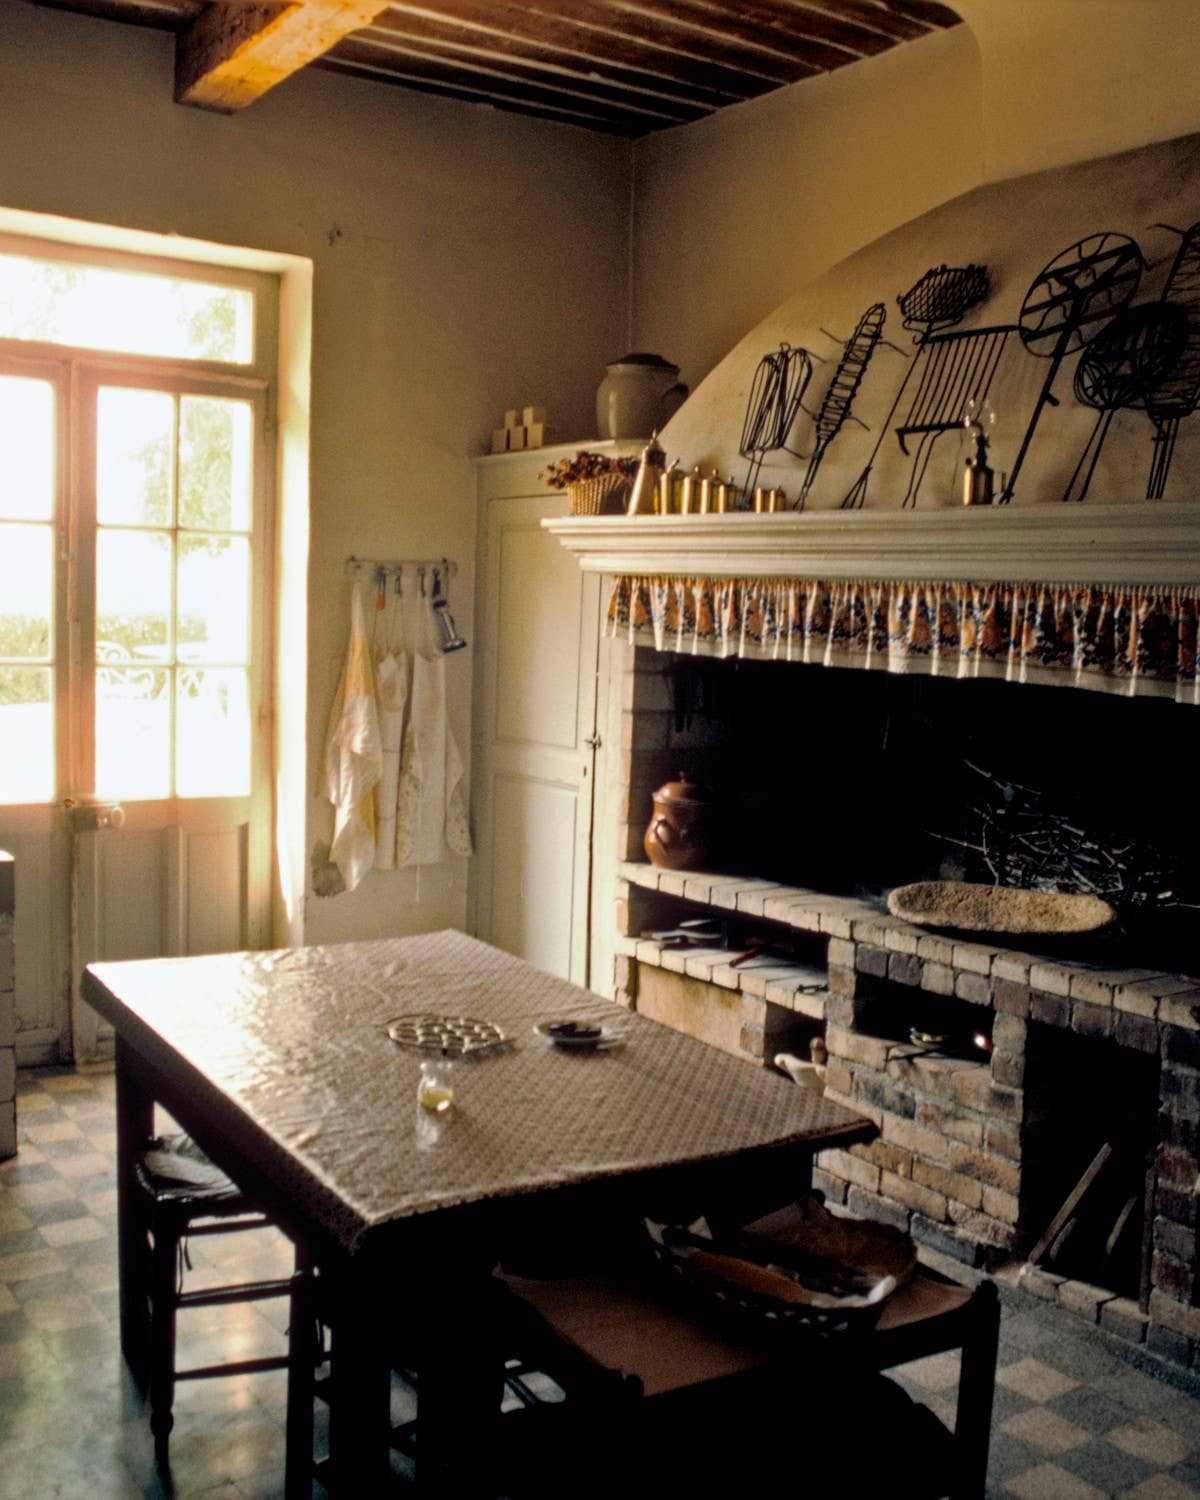 Lulu Peyraud, the Cooking Queen of Provence